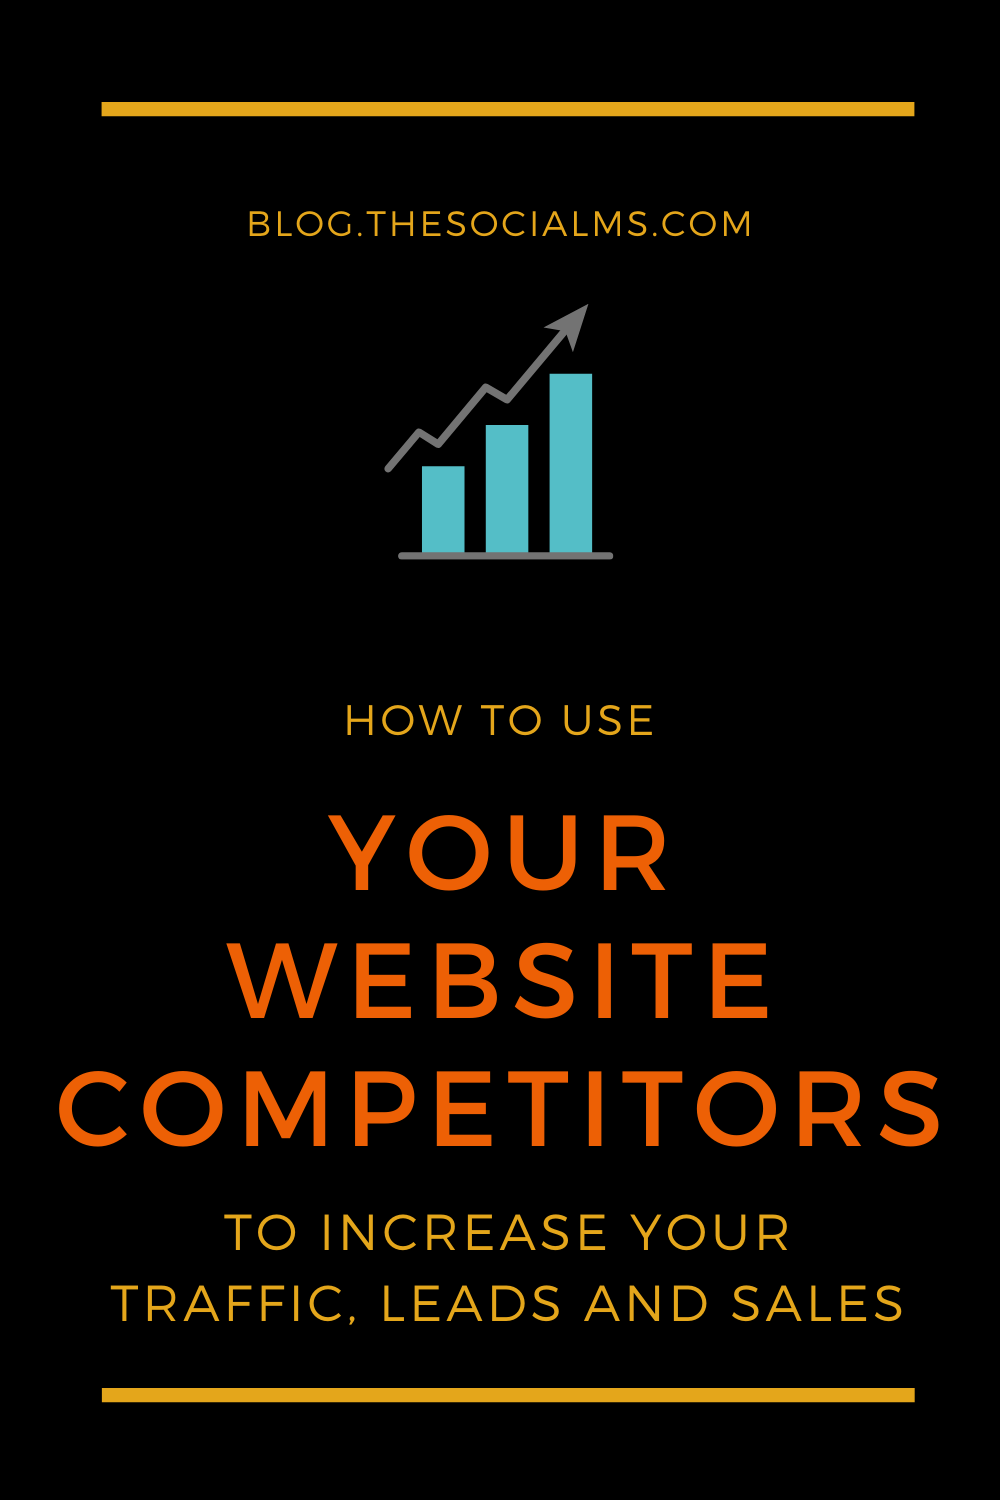 Getting to know your competitors, their exact products and their marketing strategy is one of the most important steps in finding your marketing strategy. Here is how to create better content, find a better marketing strategy and increase your traffic, leads and sales through your competitors. #competitoranalysis #contentcuration #marketingstrategy #onlinebusiness #bloggingtips #bloggingbusiness #contentmarketing